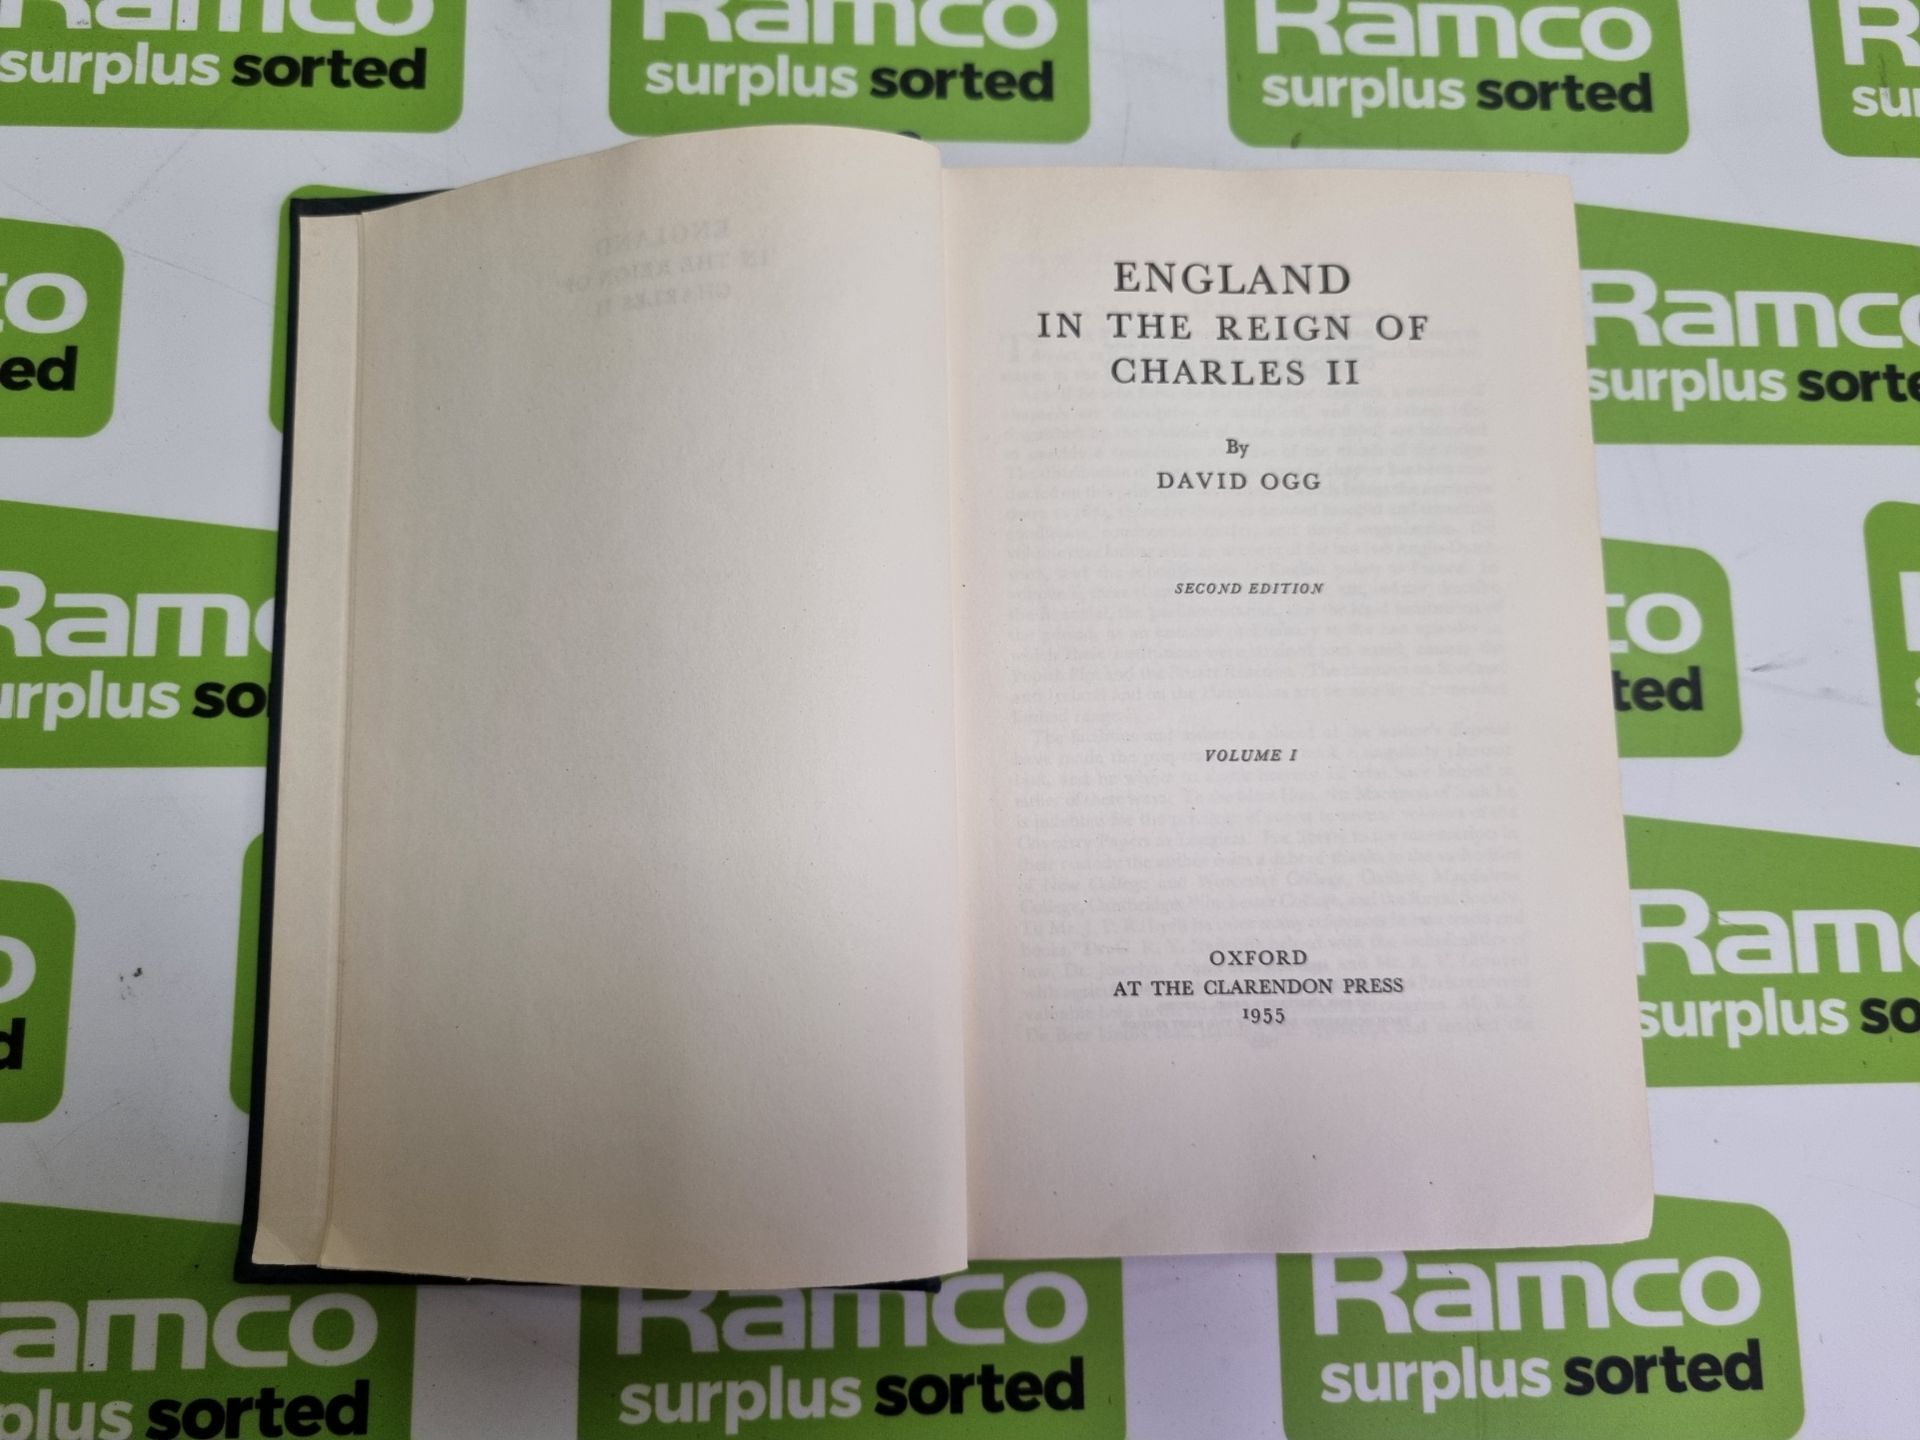 England in the reign of Charles II By David Ogg - Oxford 1955, England in the reign of James II - Image 3 of 12